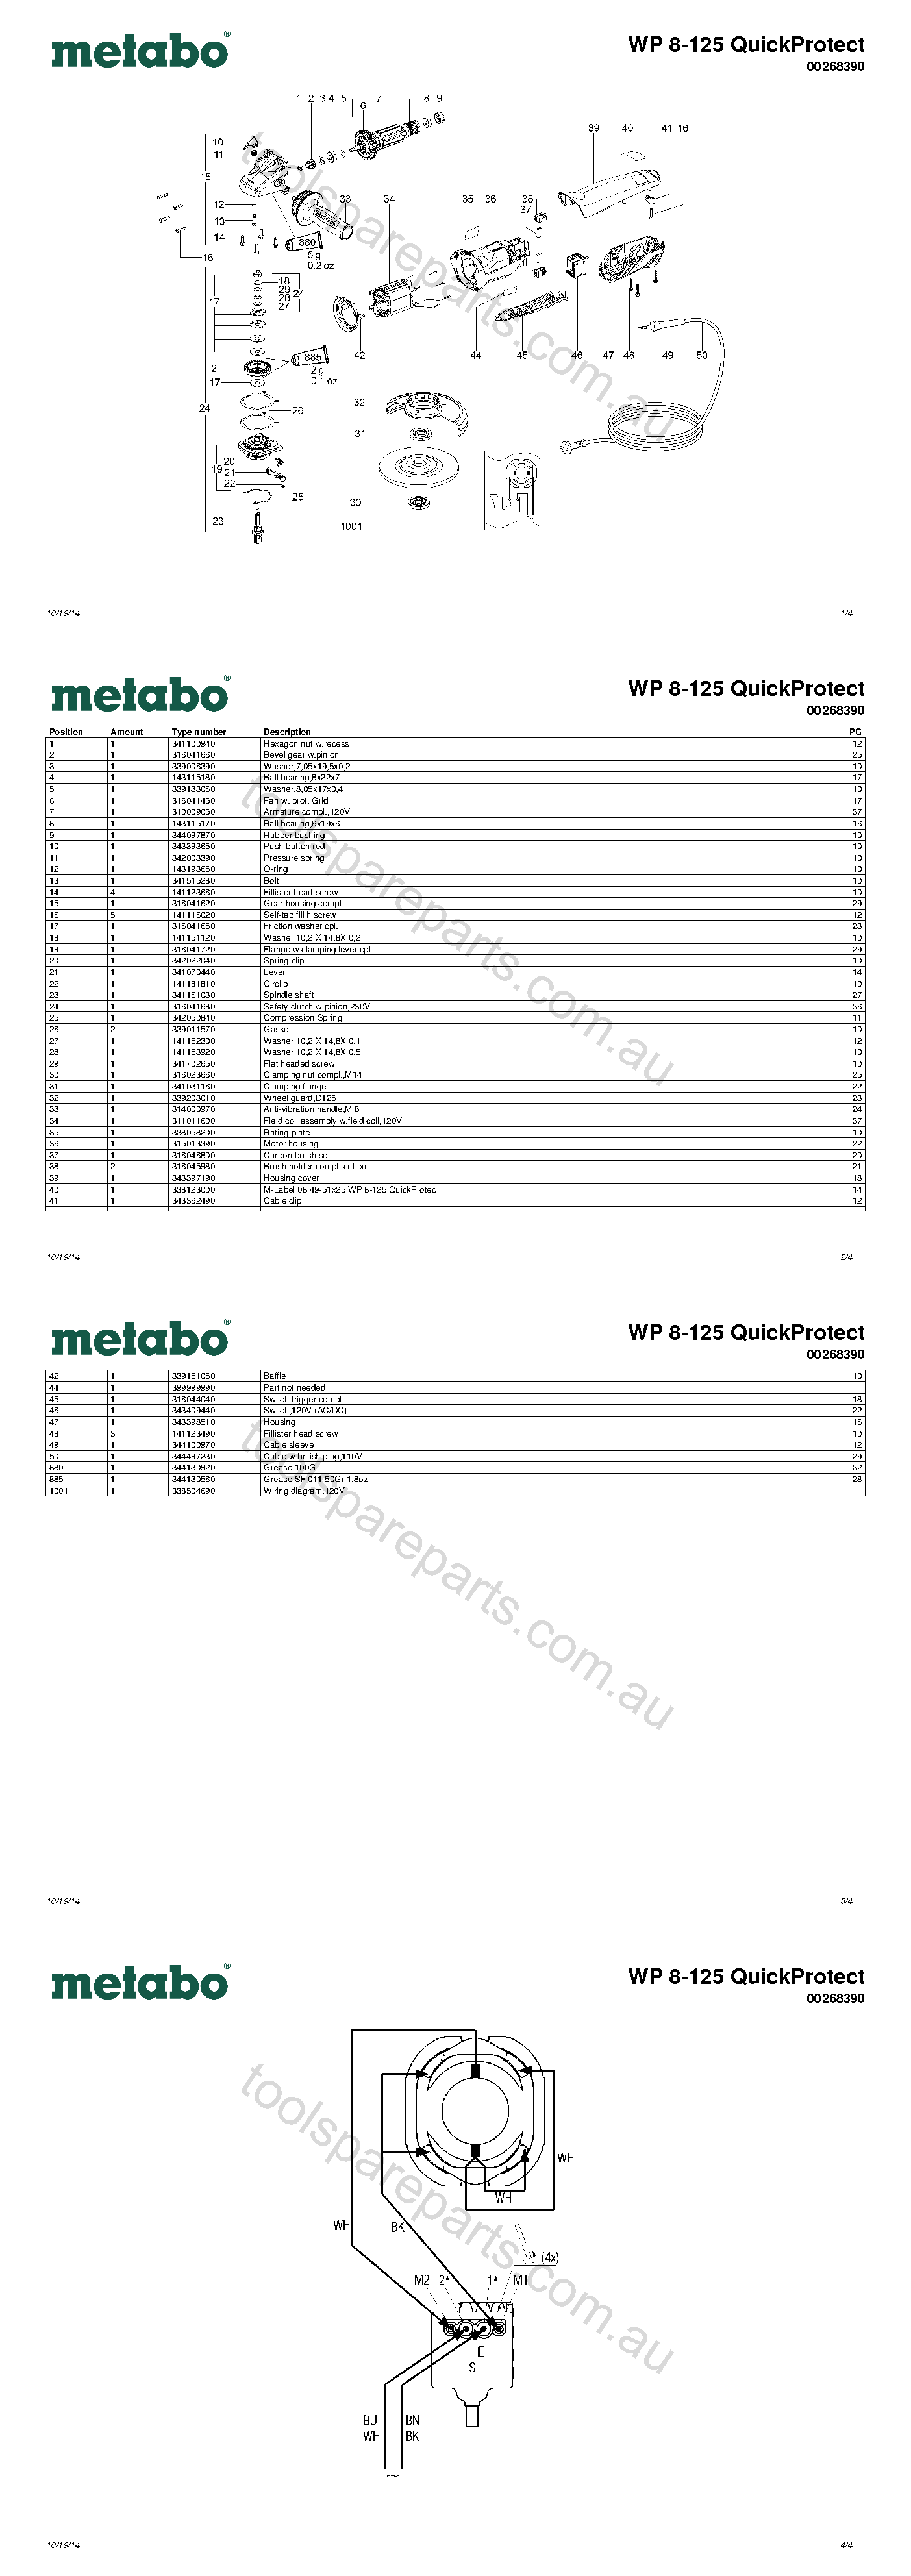 Metabo WP 8-125 QuickProtect 00268390  Diagram 1